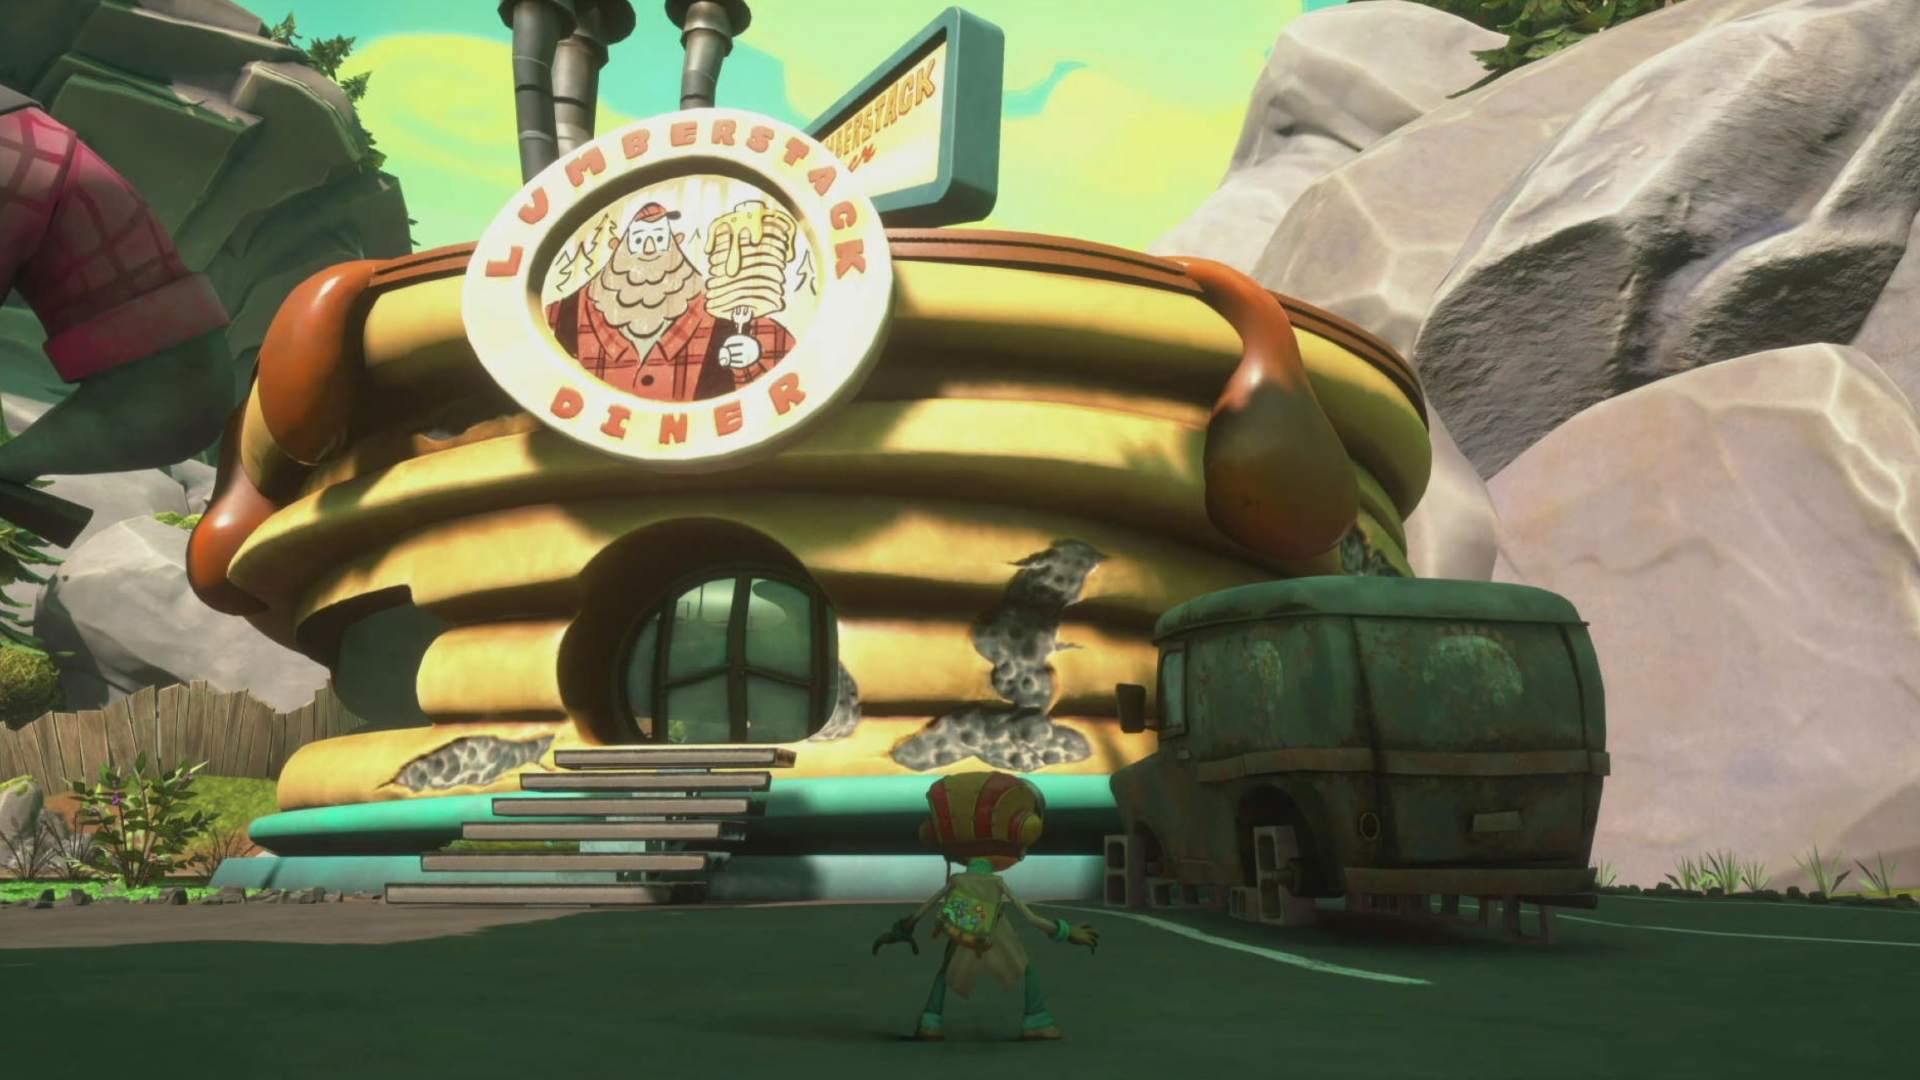 Psychonauts 2 Queepie locations: The Lumberstack Diner stand with Raz standing in the car park.